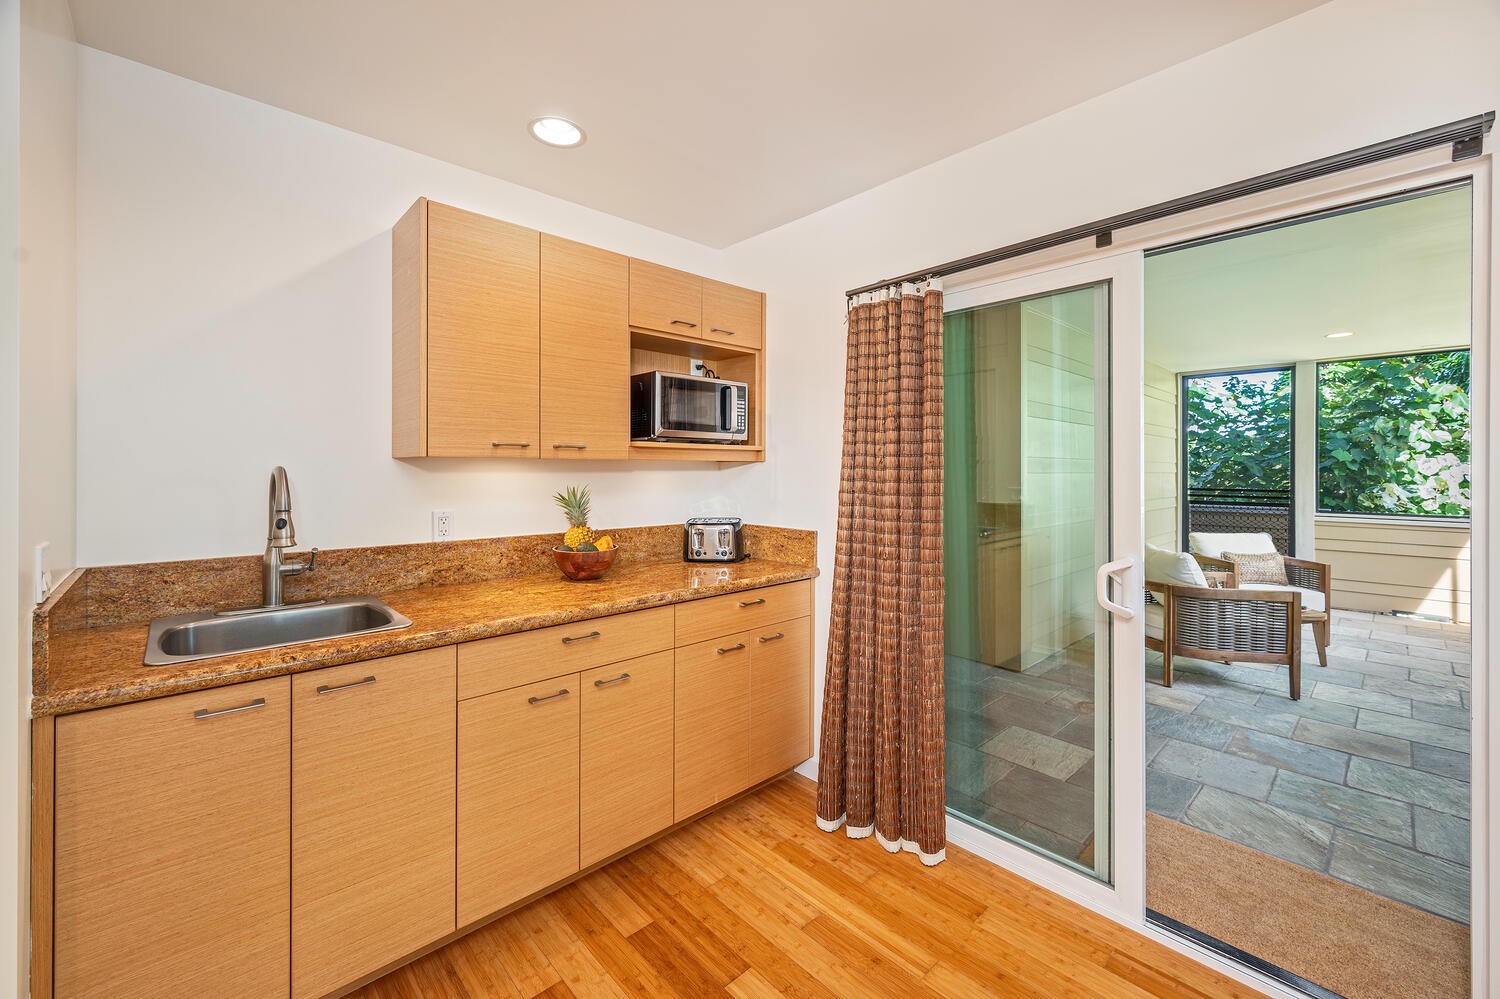 Kailua Vacation Rentals, Hale Honi La - Lower level primary wet bar and indoor/outdoor lanai